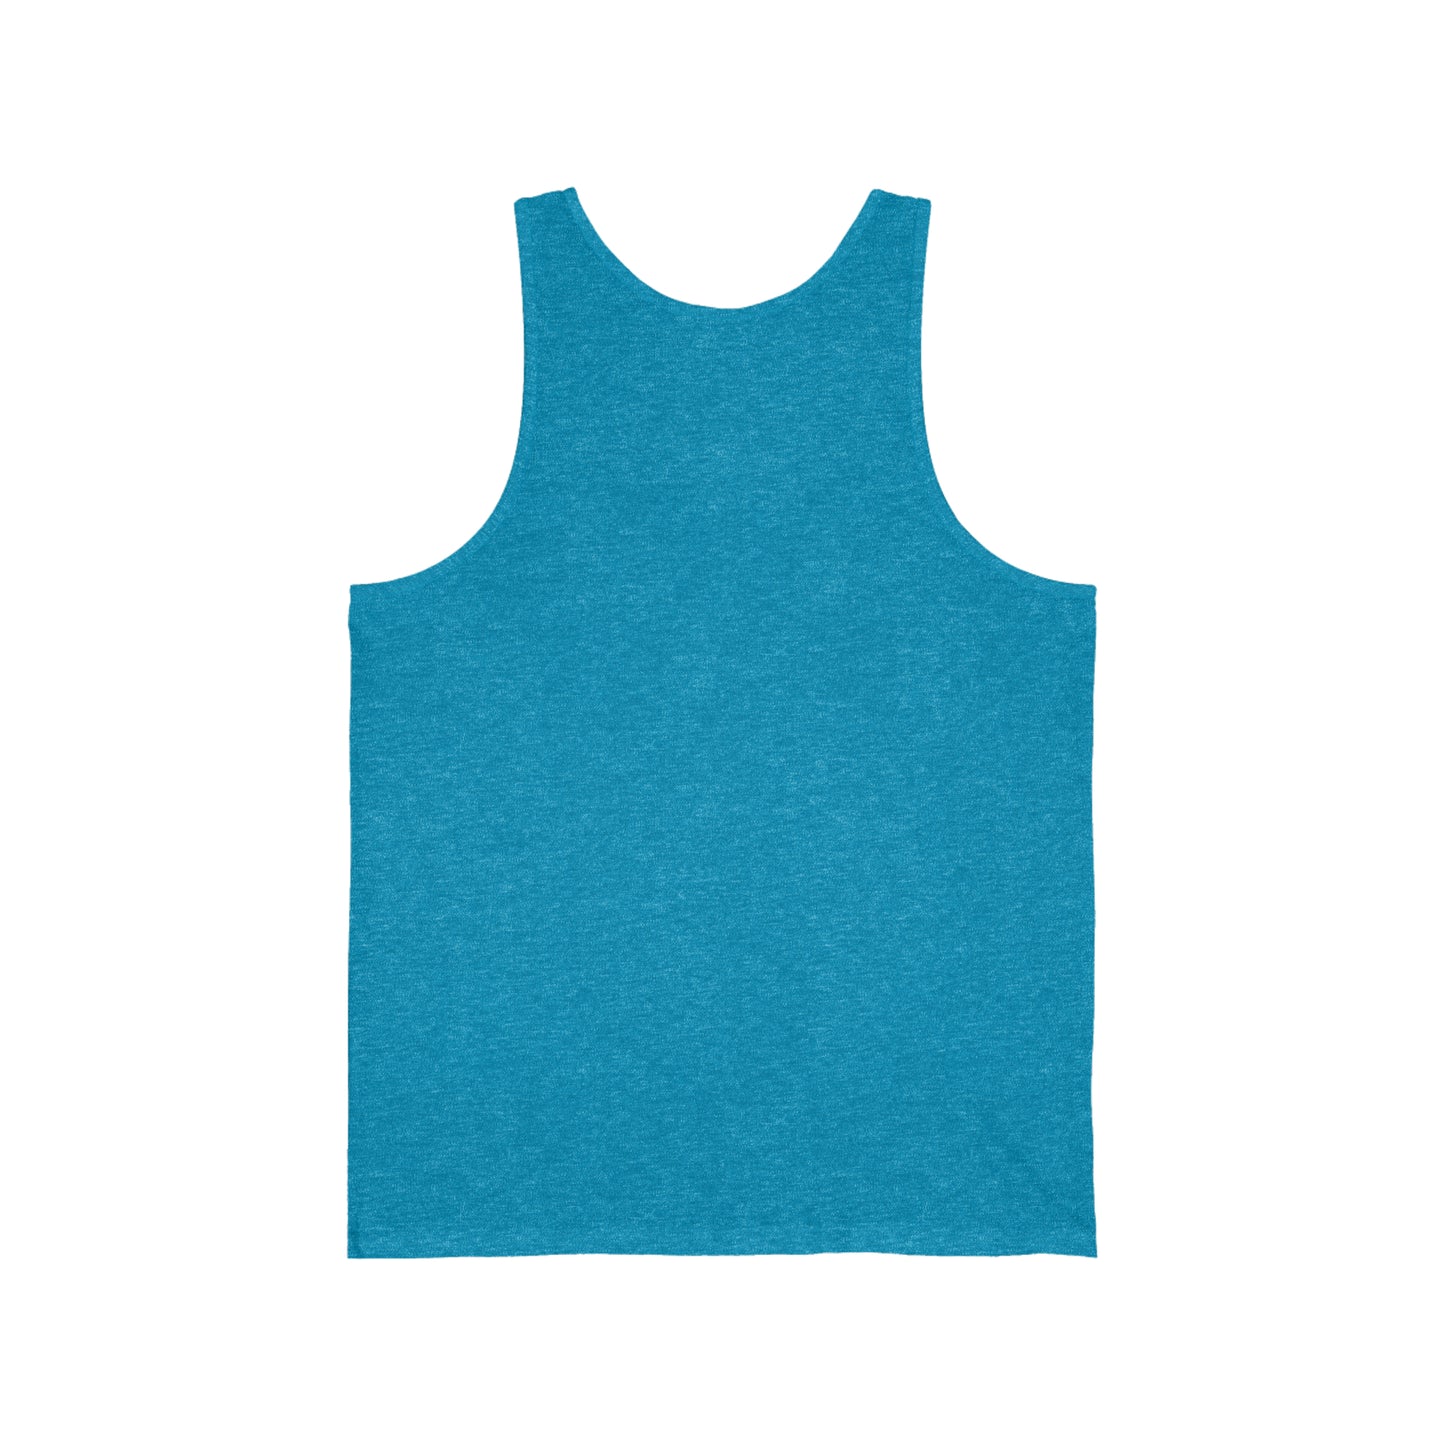 Don't forget to tell your cat Unisex Jersey Tank